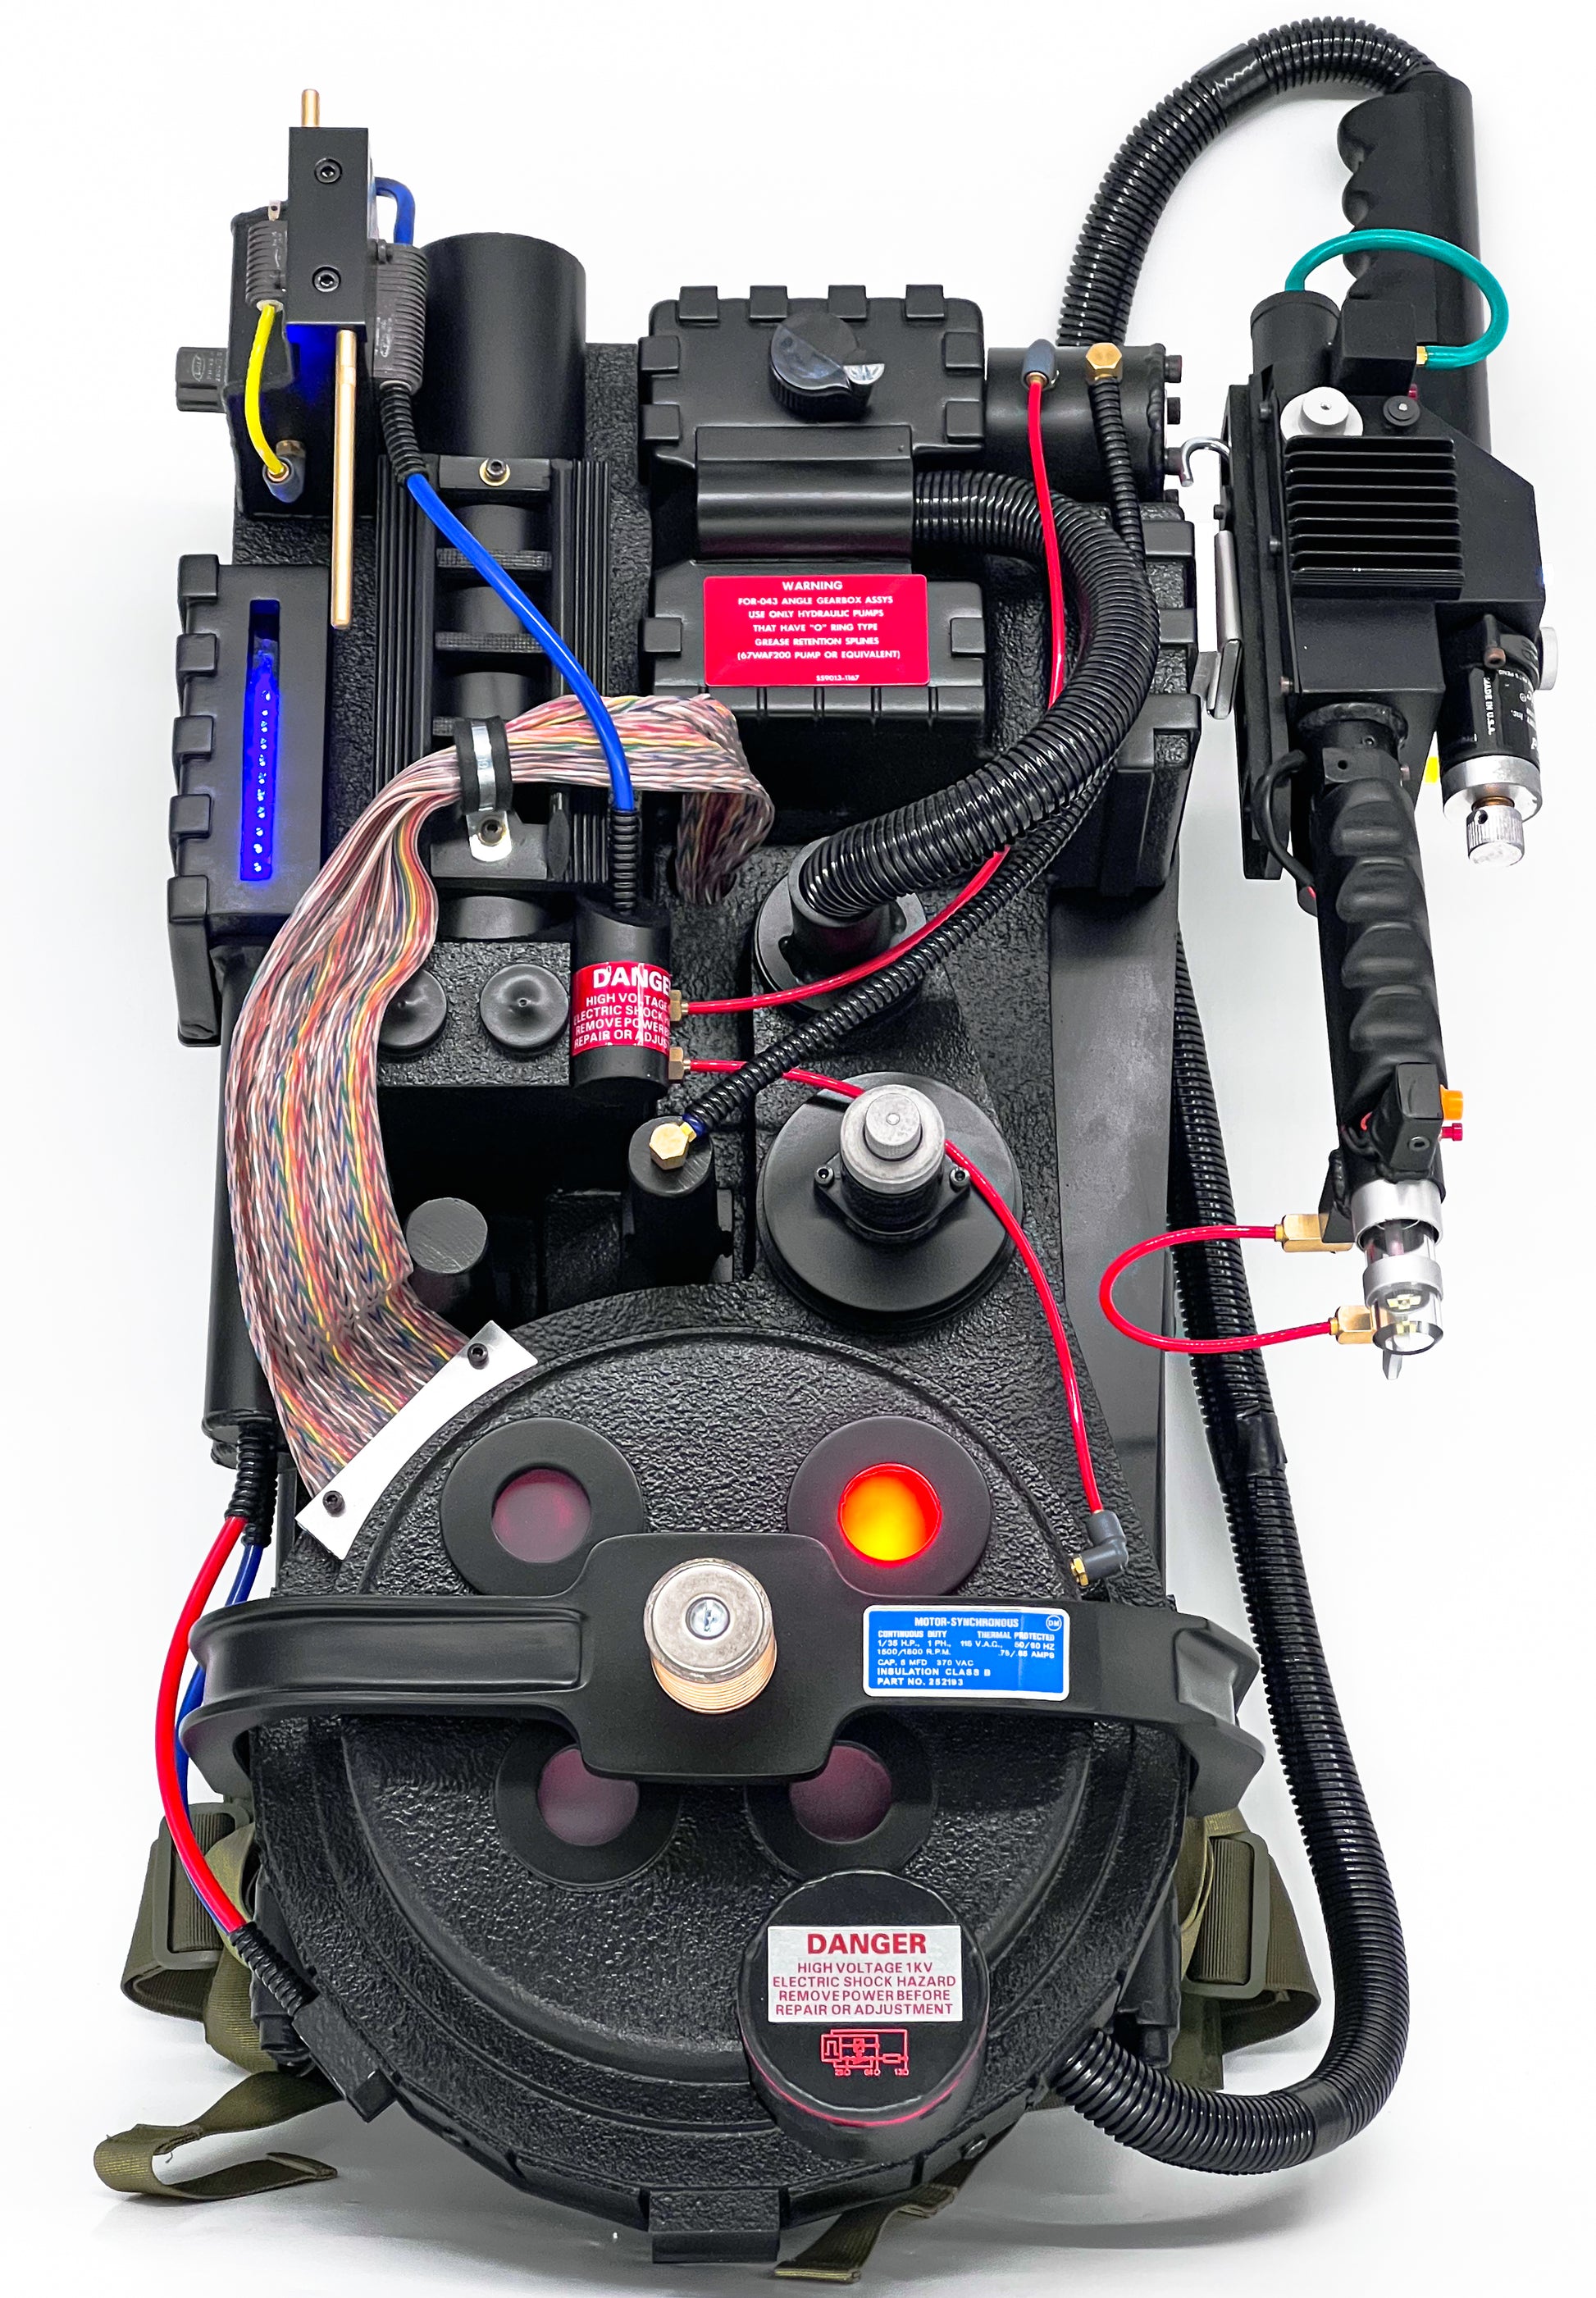  The '89 Proton Pack 